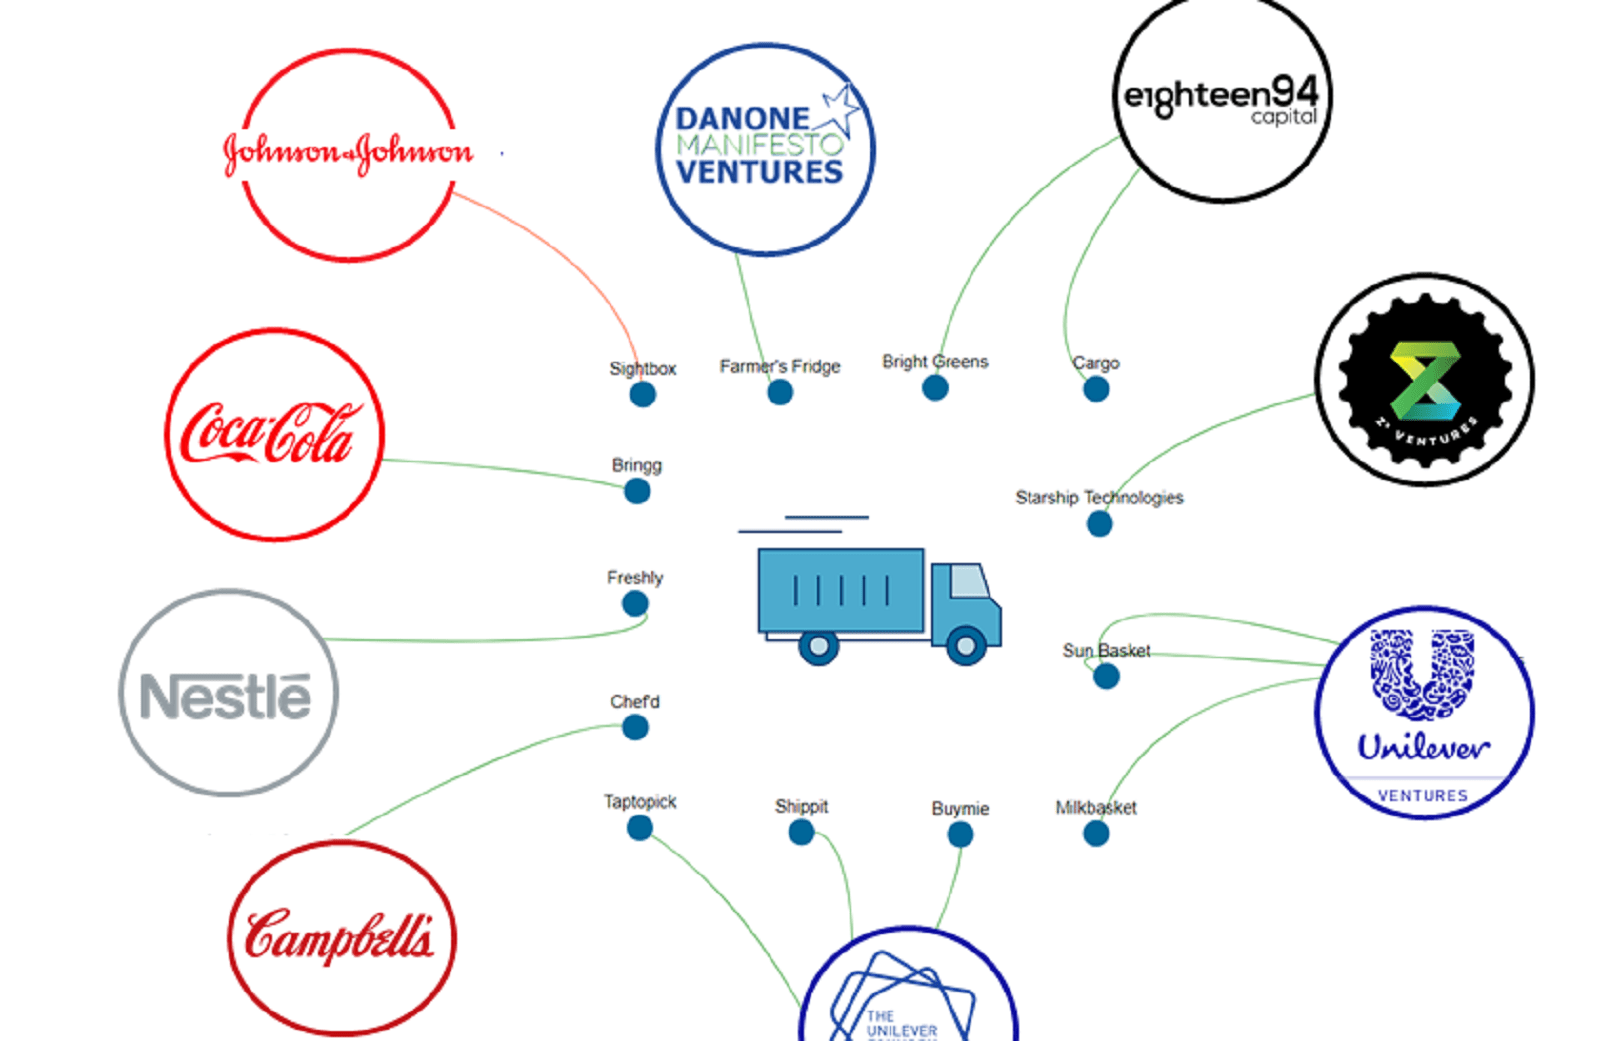 CPG Brands: Dominate Your Category With a Logistics Strategy - Zipline  Logistics